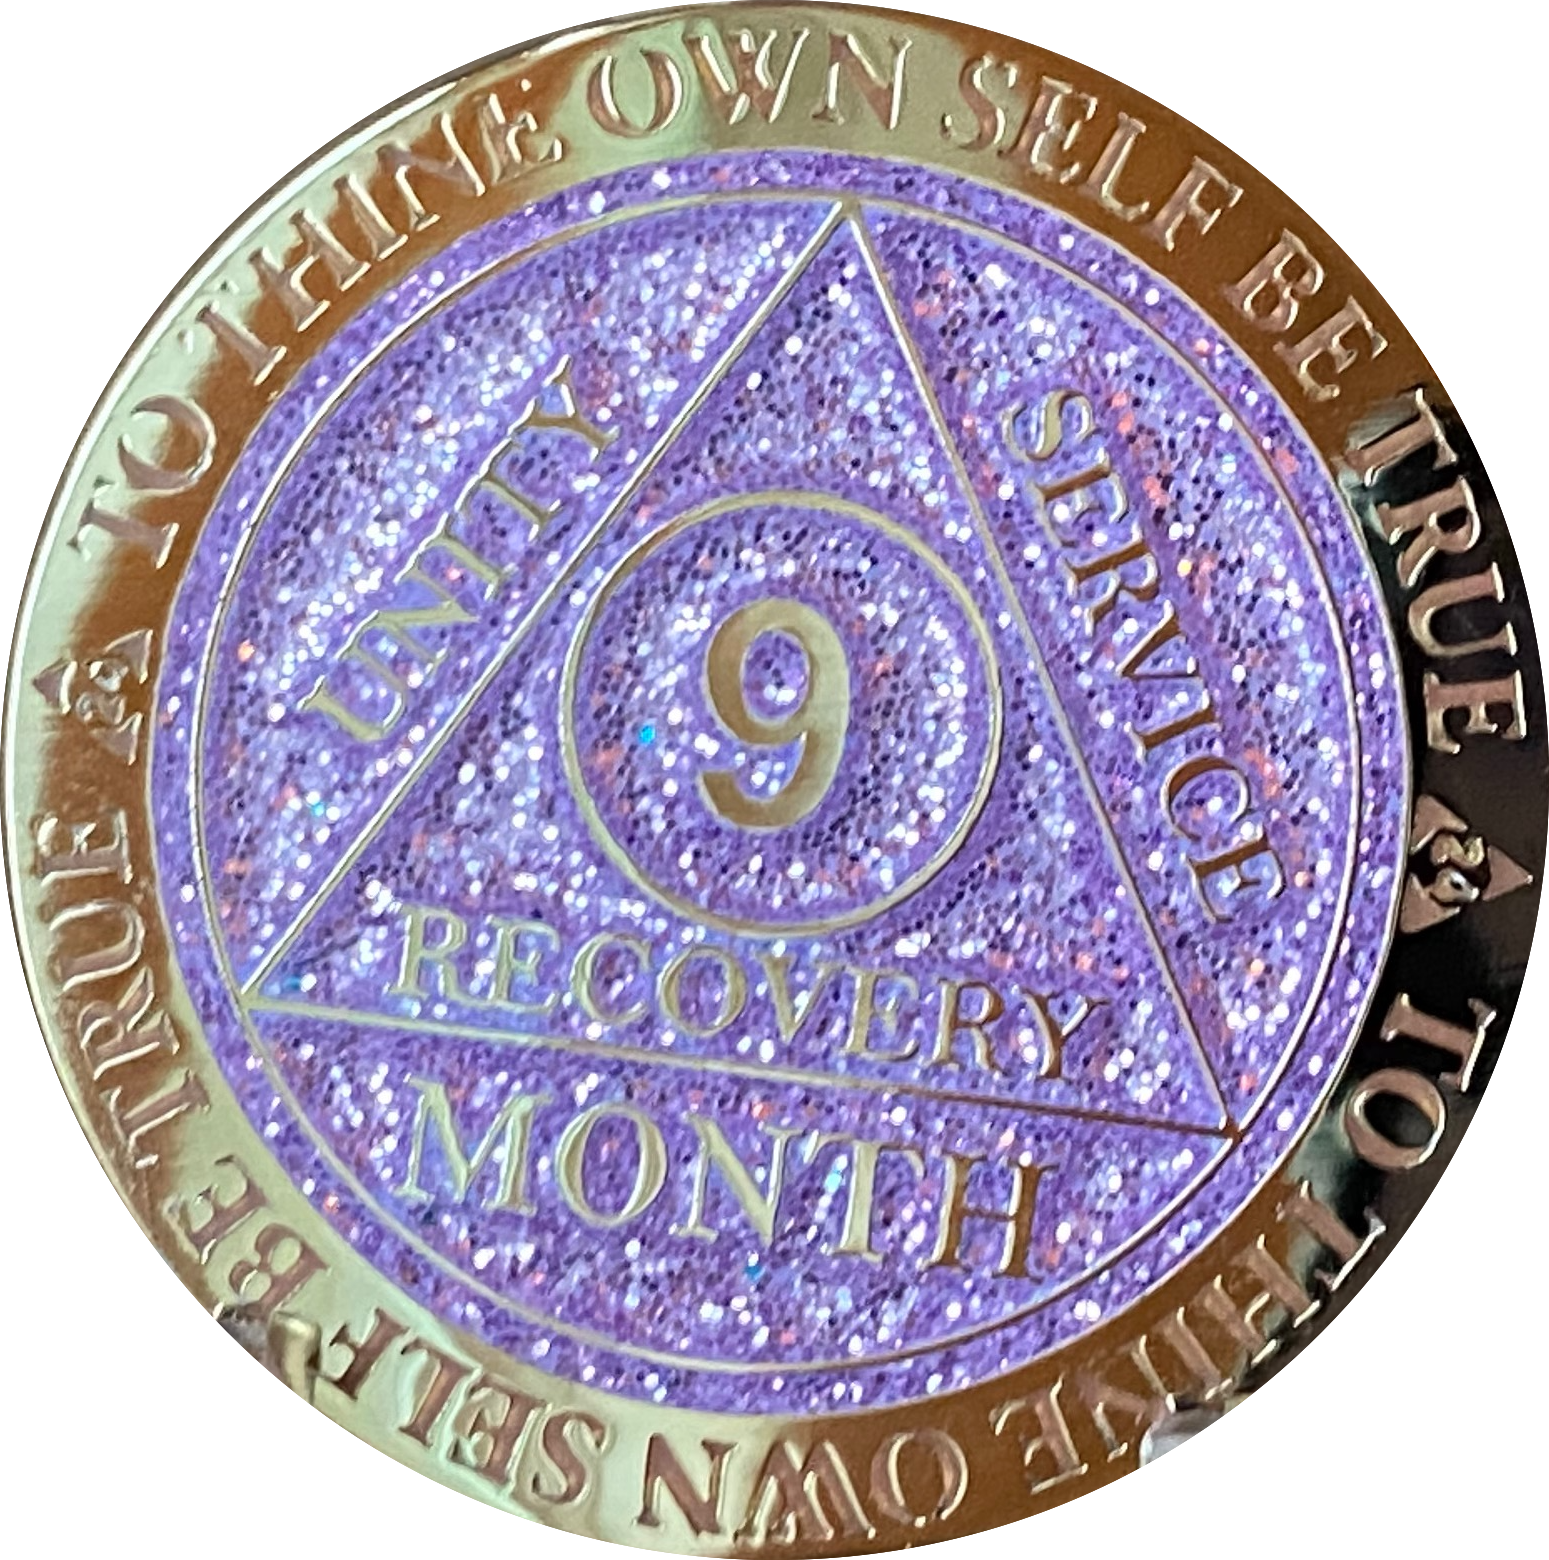 9 Month AA Medallion Recoverychip Reflex Purple Glitter Sobriety Chip Coin